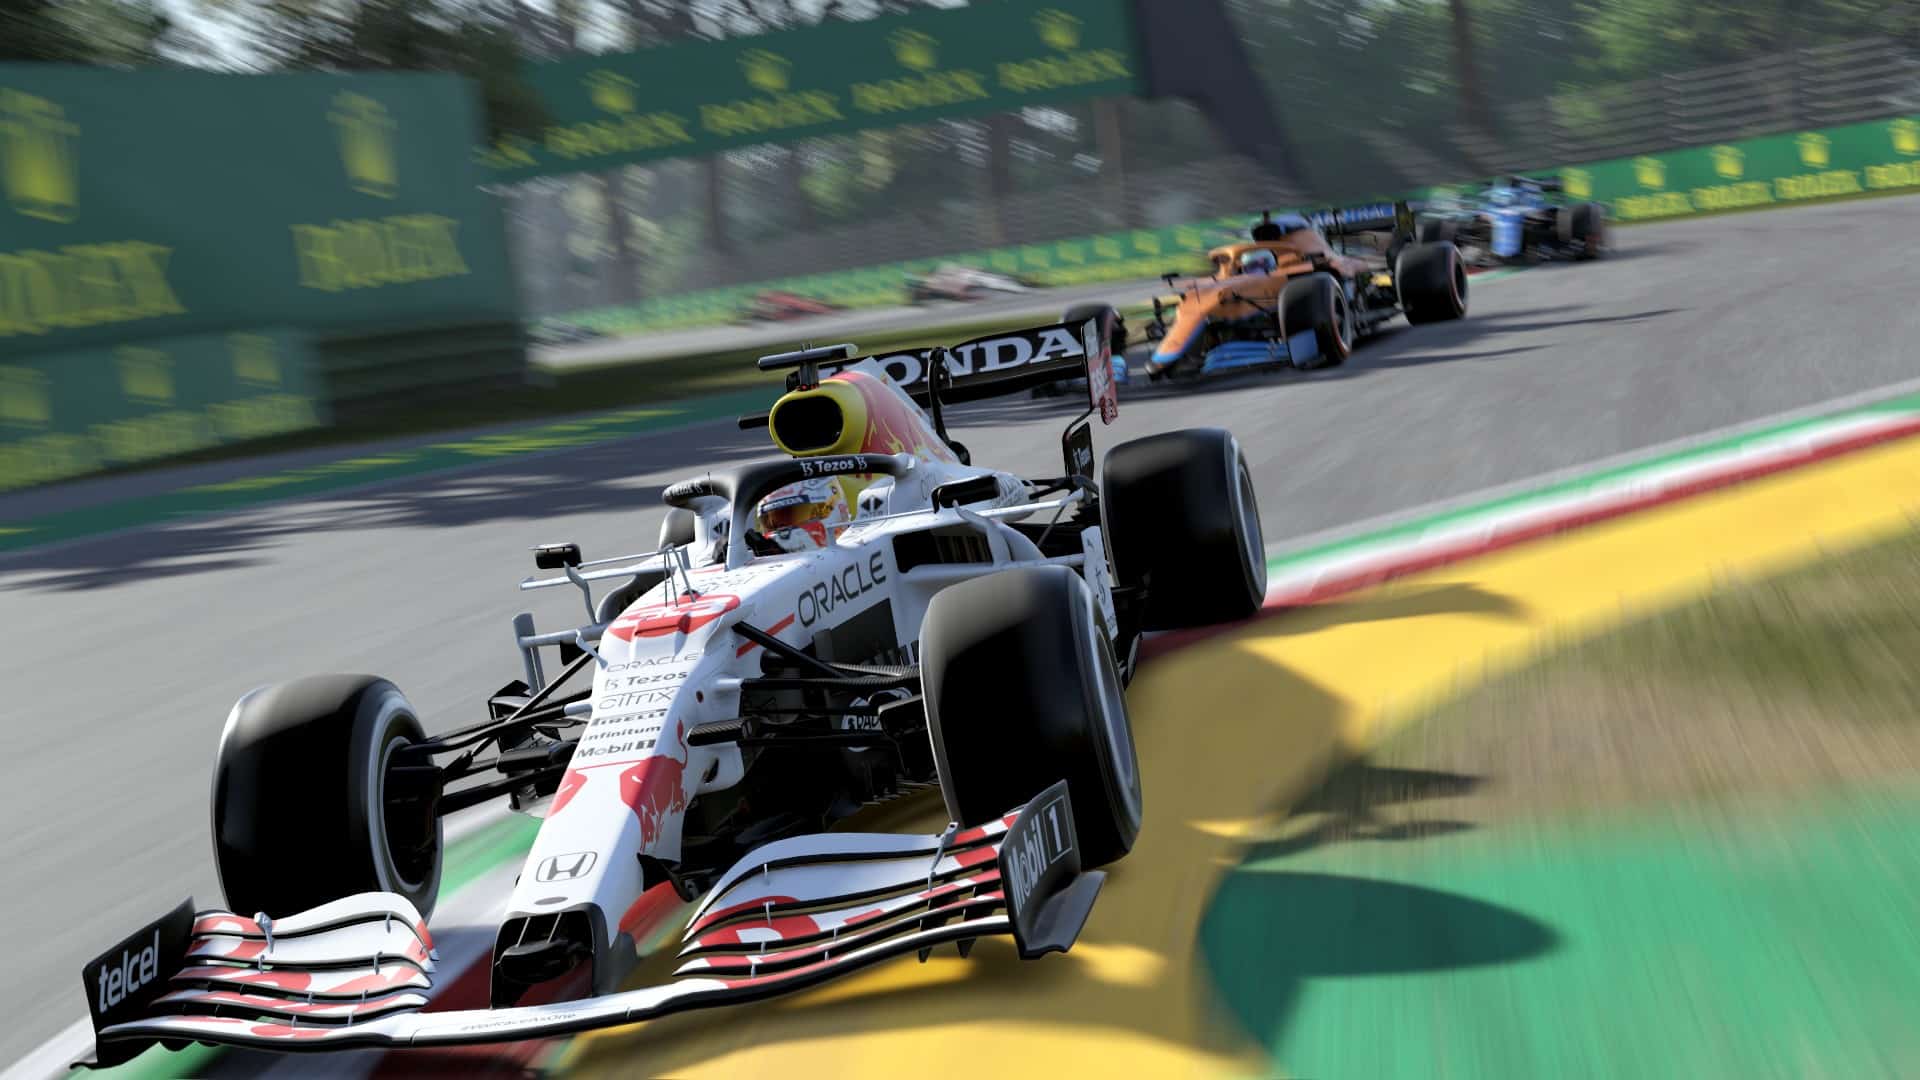 F1 2021 1.12 patch adds Imola, special Red Bull livery